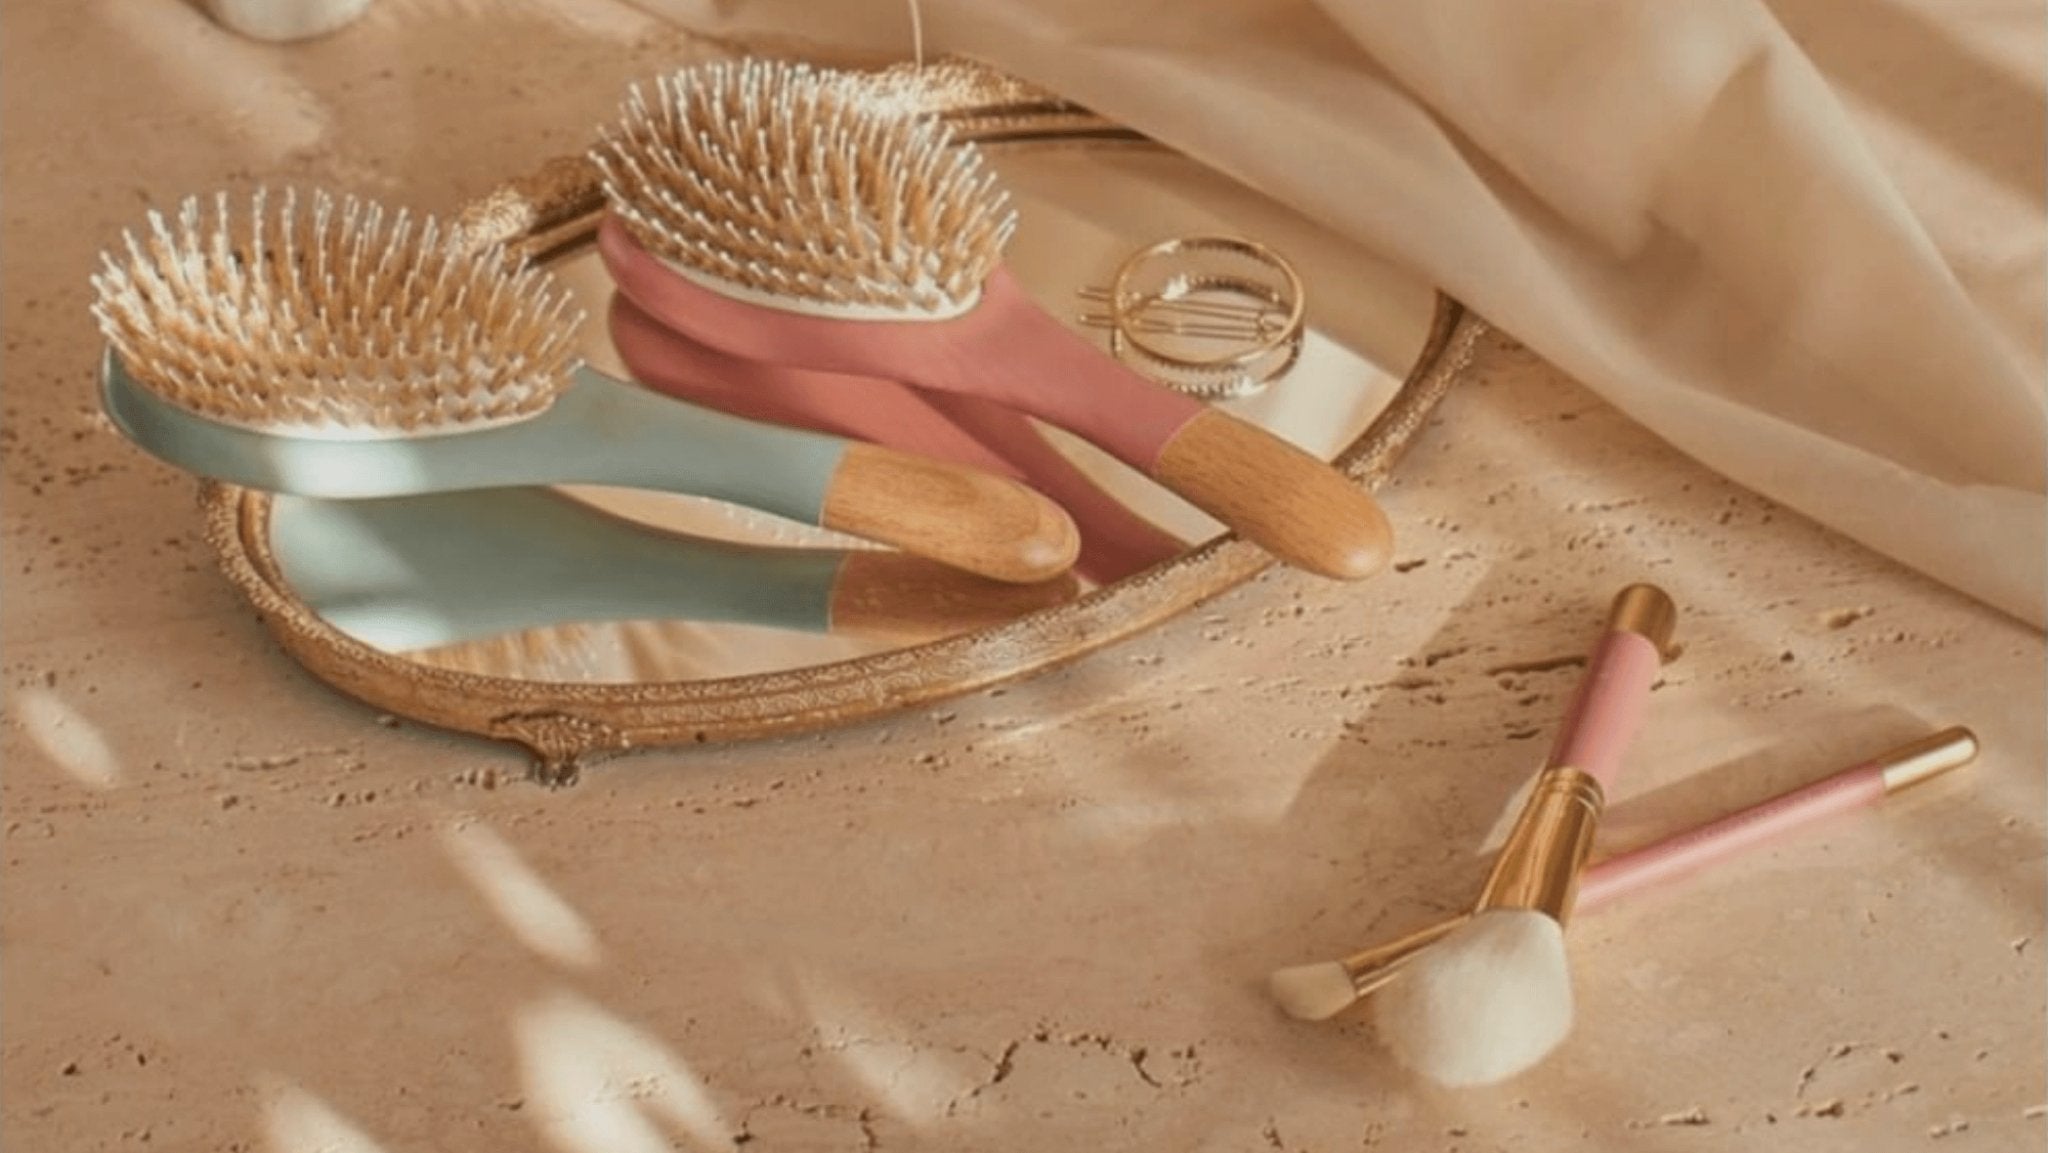 Hair-brushing 101 with BACHCA - French Beauty Co.